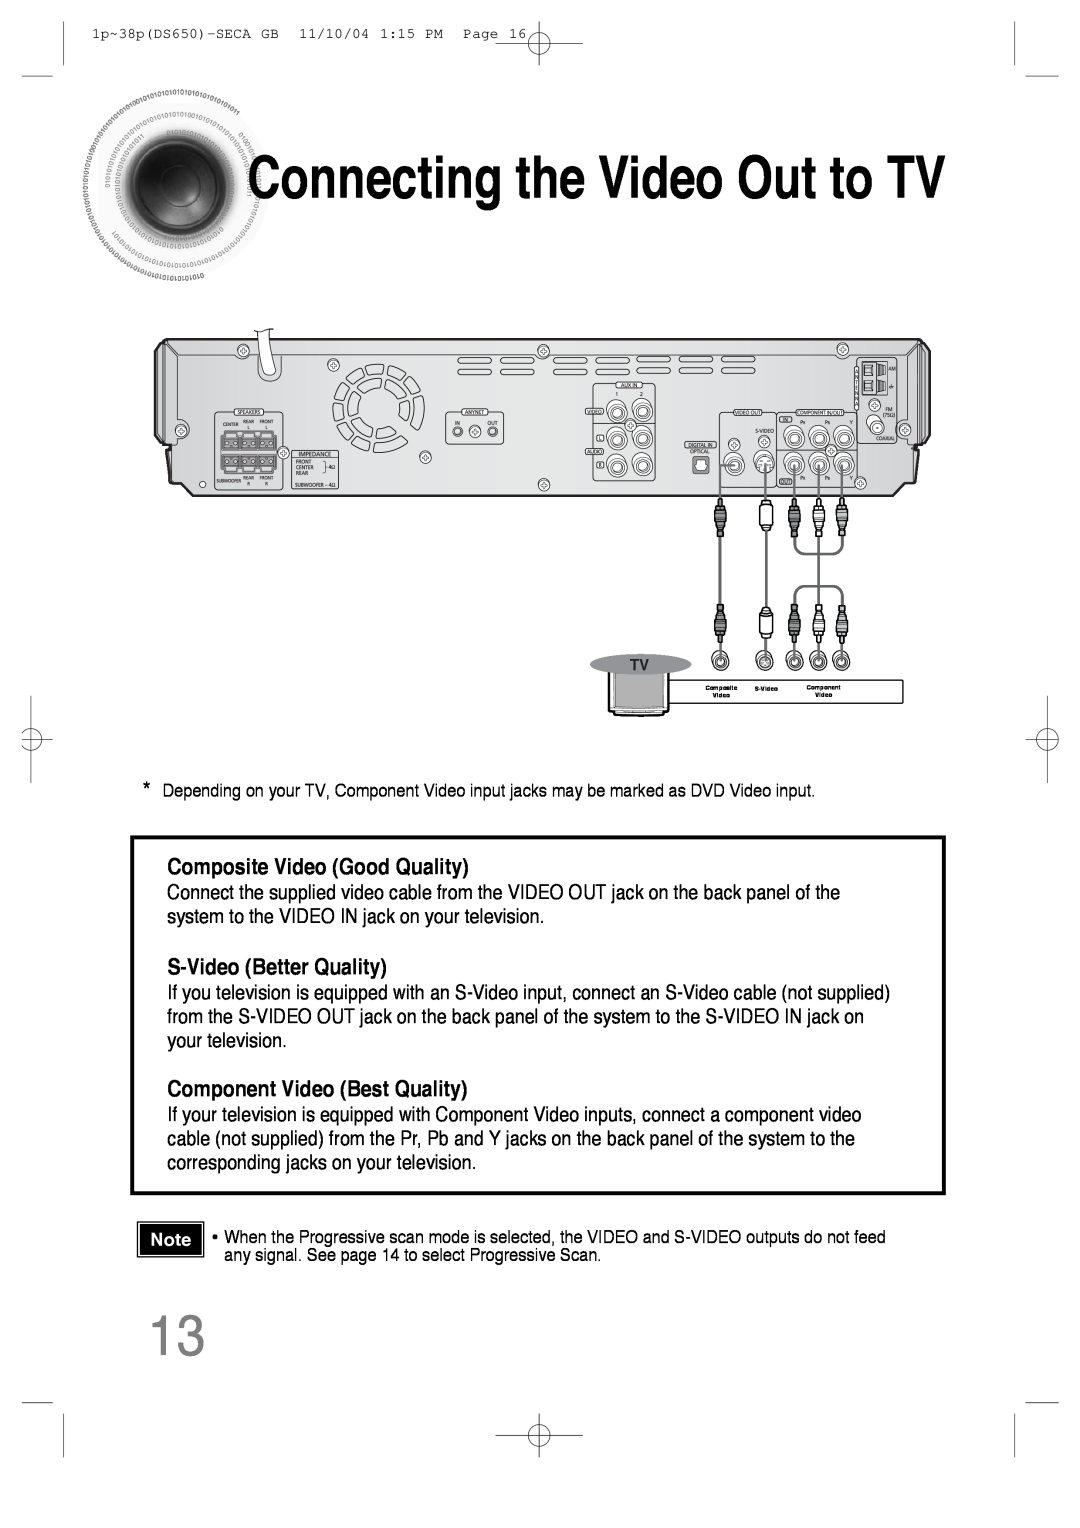 Samsung HT-DS650 instruction manual Connectingthe Video Out to TV, Composite Video Good Quality, S-VideoBetter Quality 